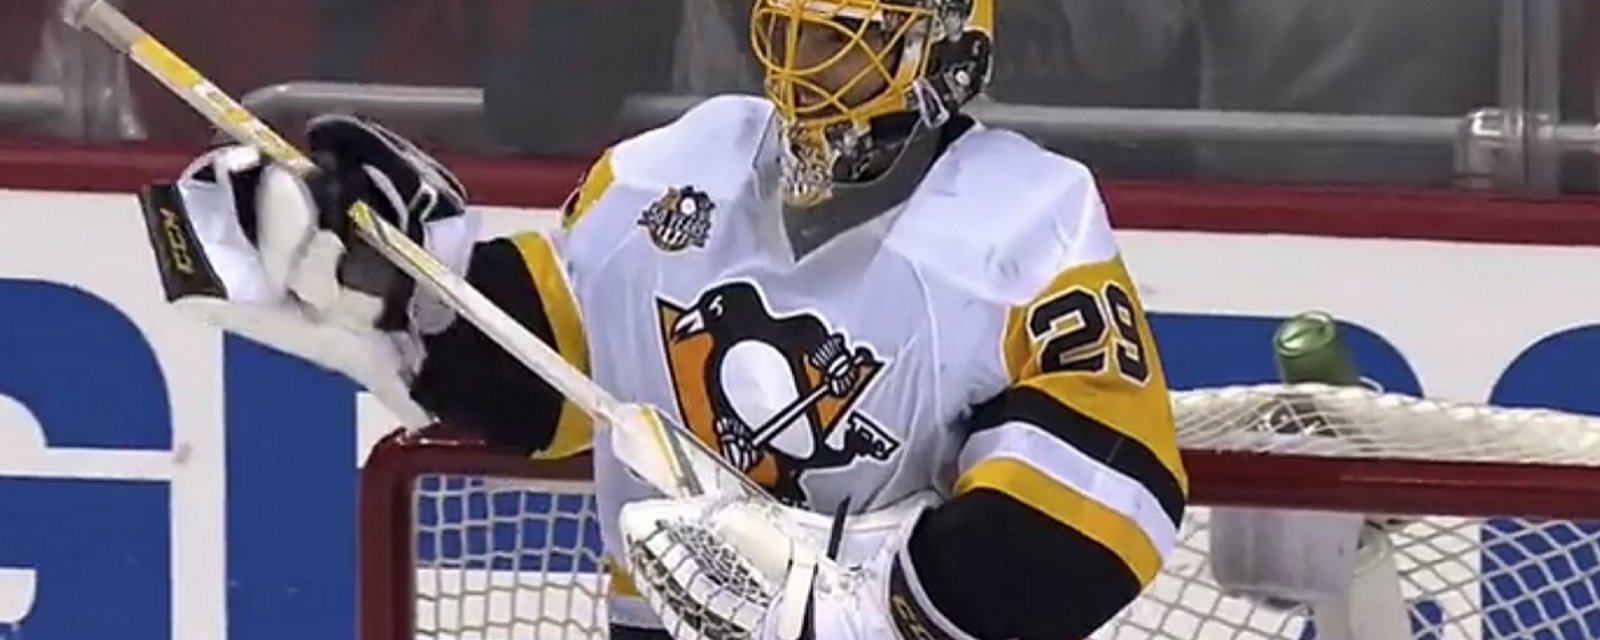 Marc-Andre Fleury thanks his stick in bizarre fashion after huge save.